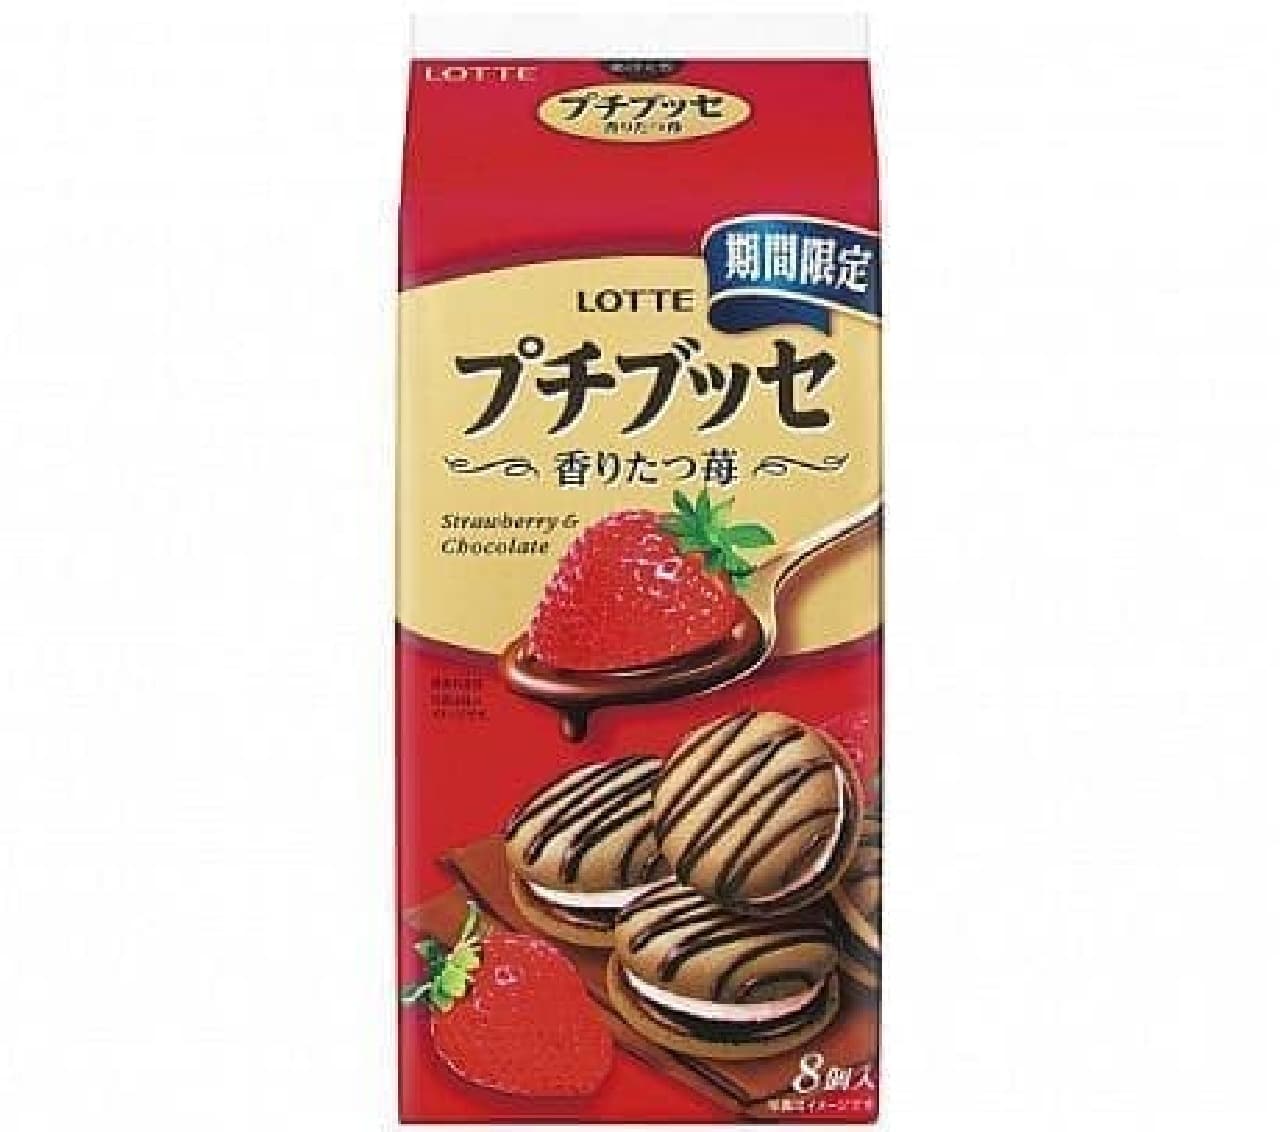 Lotte "Petit Busse [Scented Strawberry]"